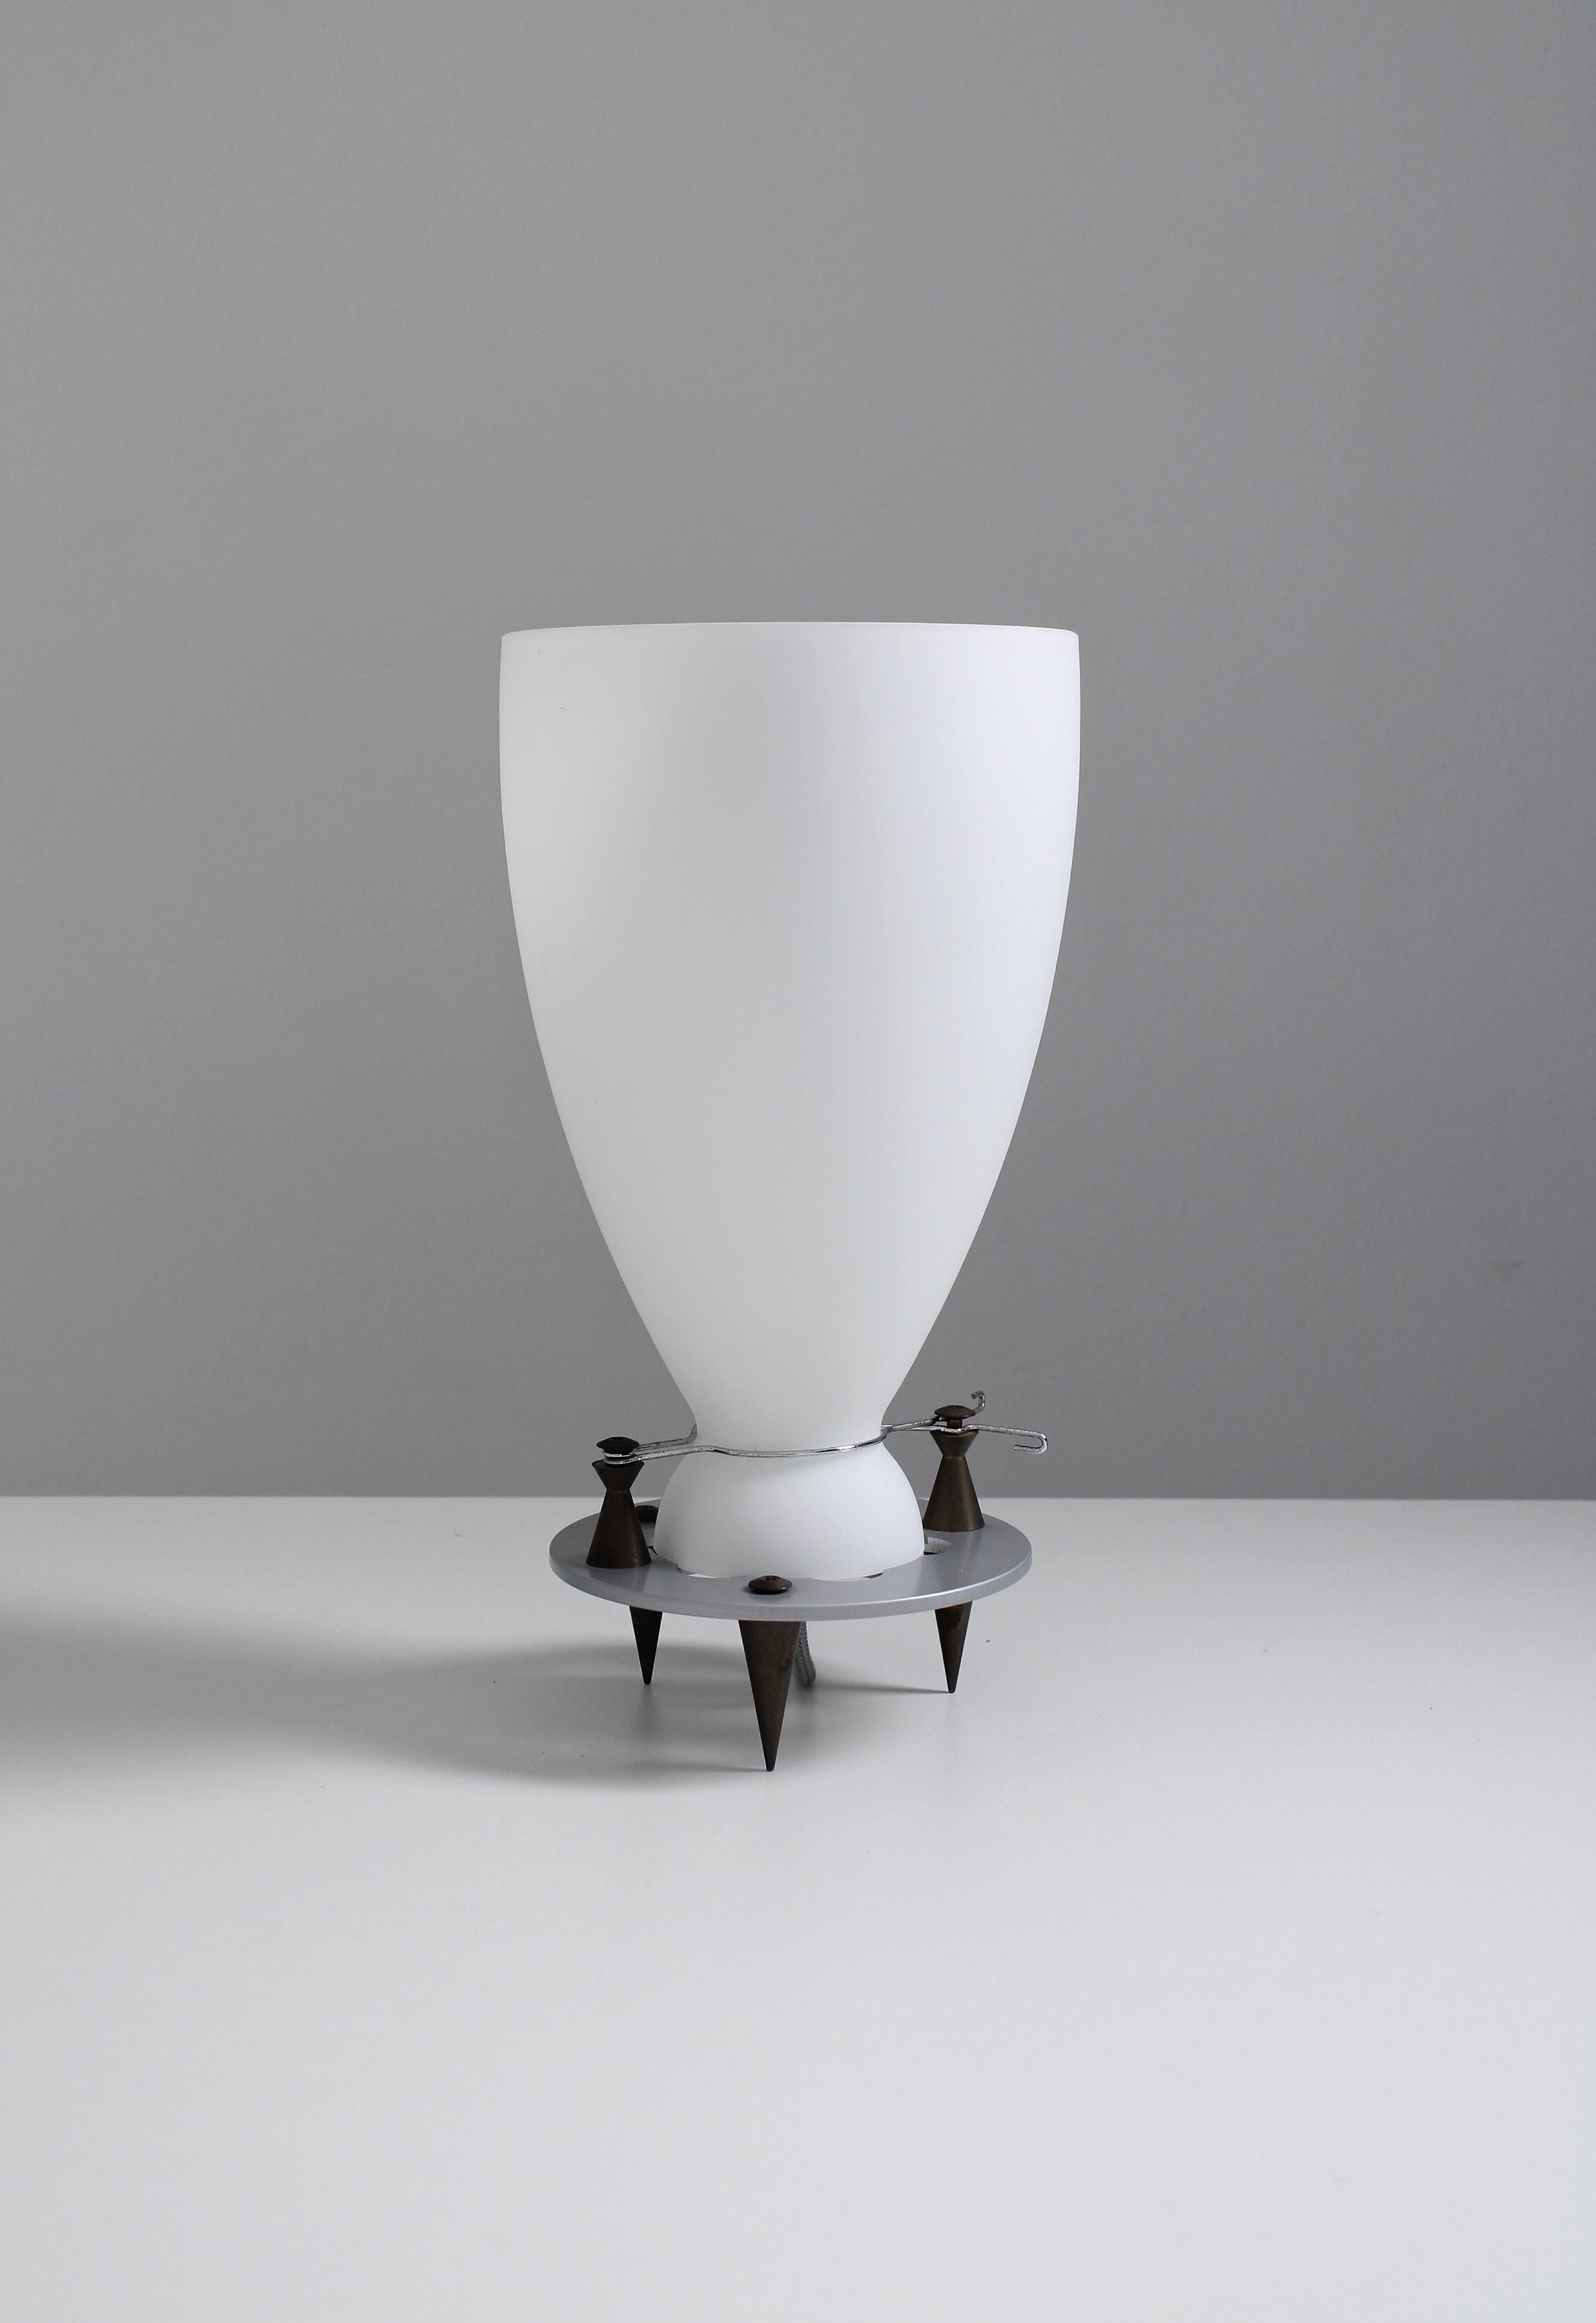 Late 20th Century Franceschina Table Lamp by Umberto Riva for Fontana Arte, 1989 For Sale